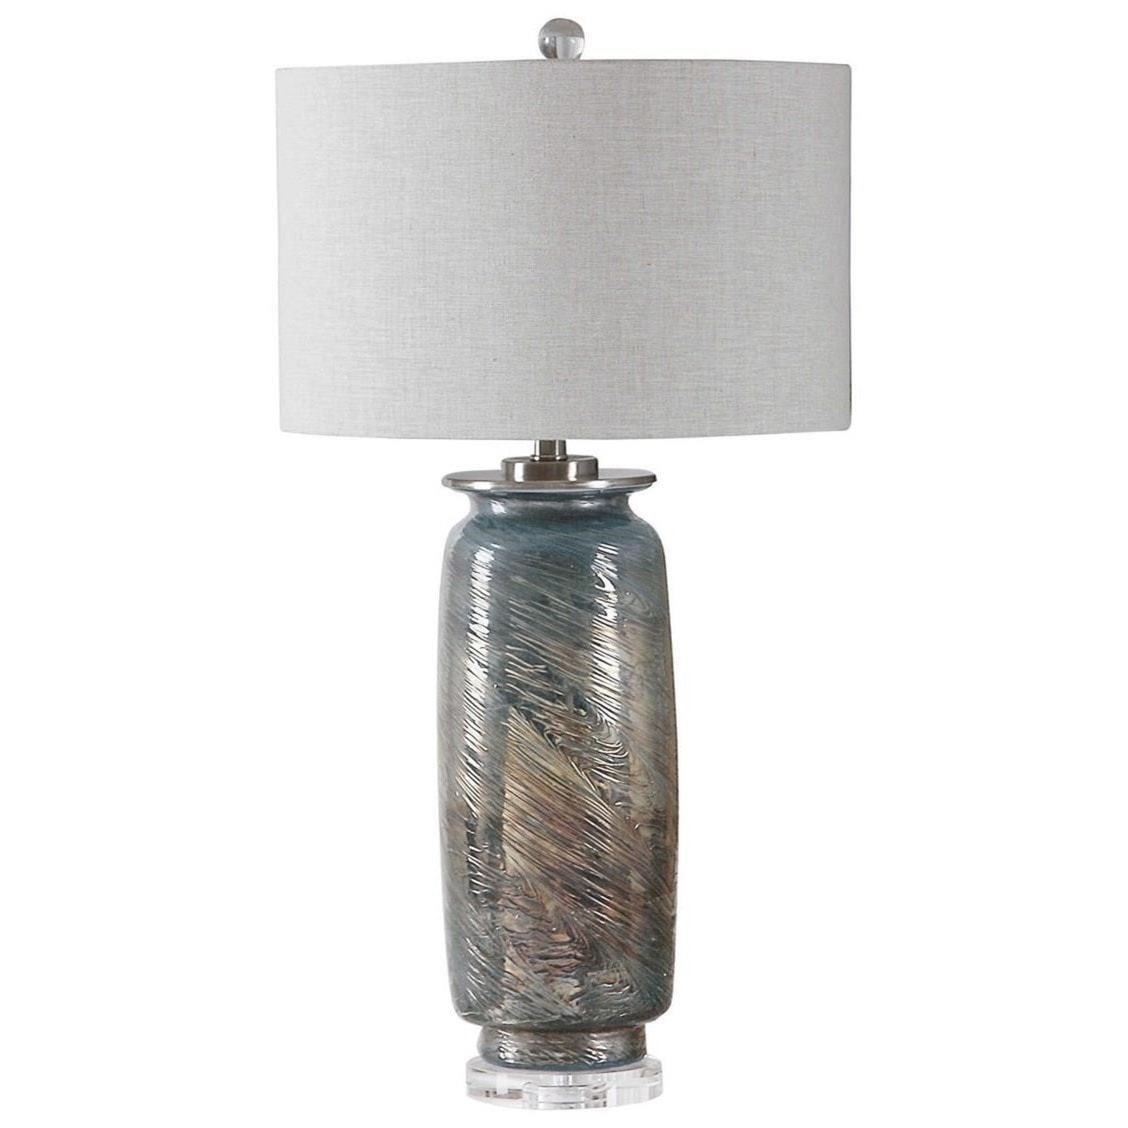 Uttermost Table Lamps Olesya Swirl Glass Table Lamp Stuckey Furniture  Lamp Table Lamp